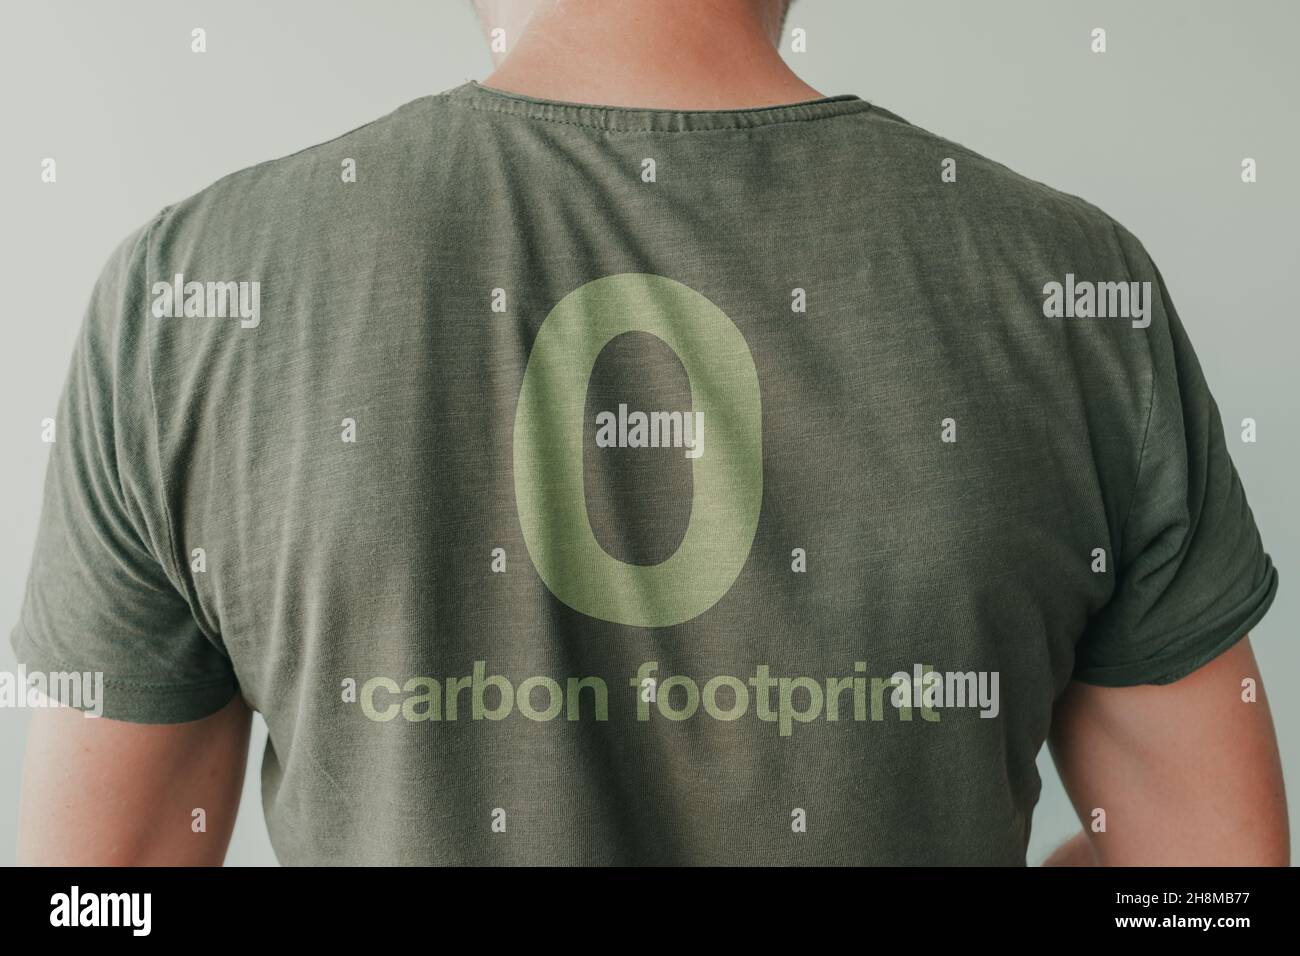 Man wearing green t-shirt with 0 carbon footprint text on back, portrait of environmentalist and environmental activist Stock Photo